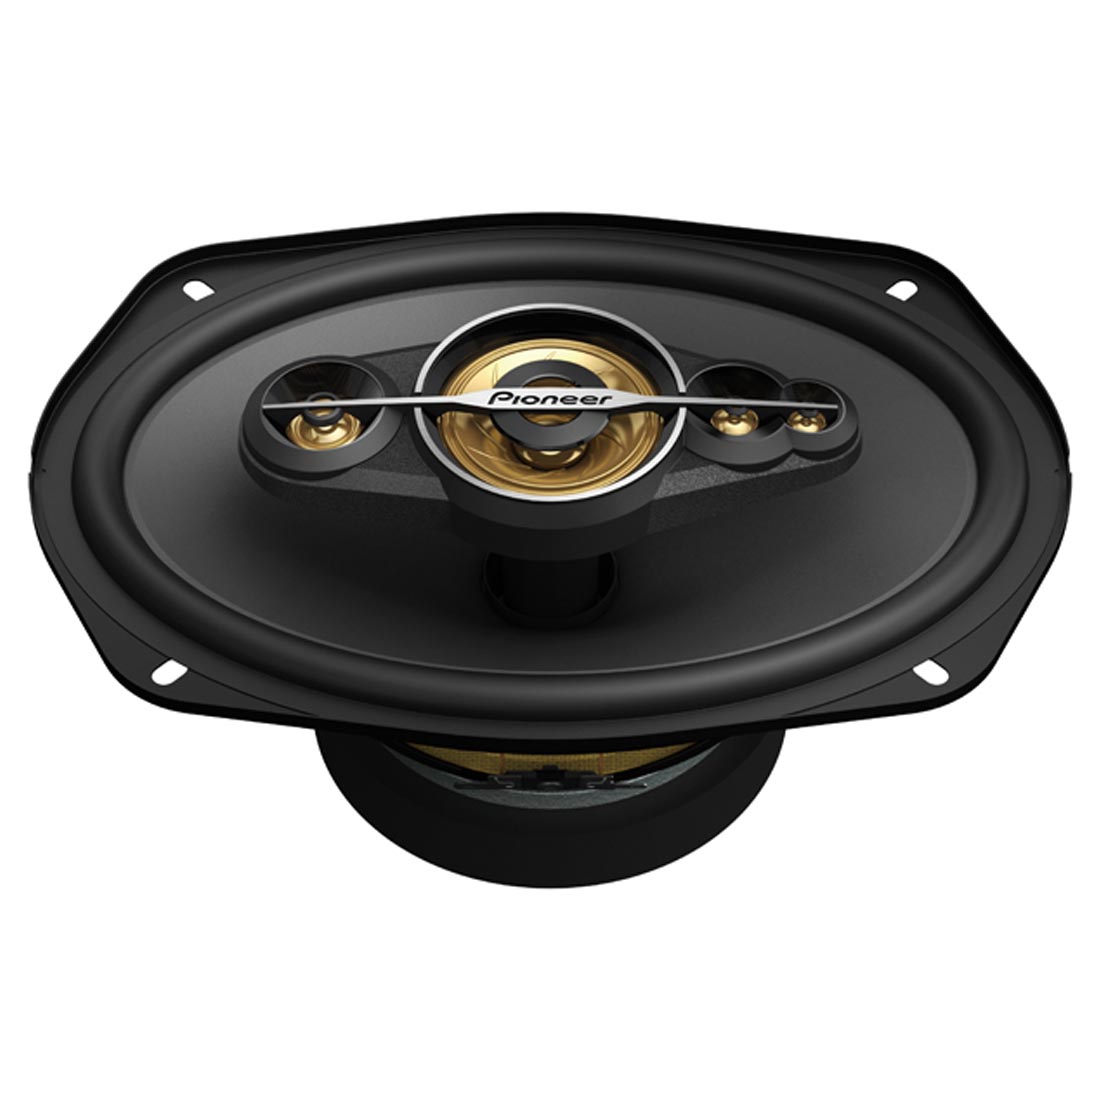 Pioneer TS-A6991FH A-Series + 6″x9″ 5-Way Coaxial Car Speakers